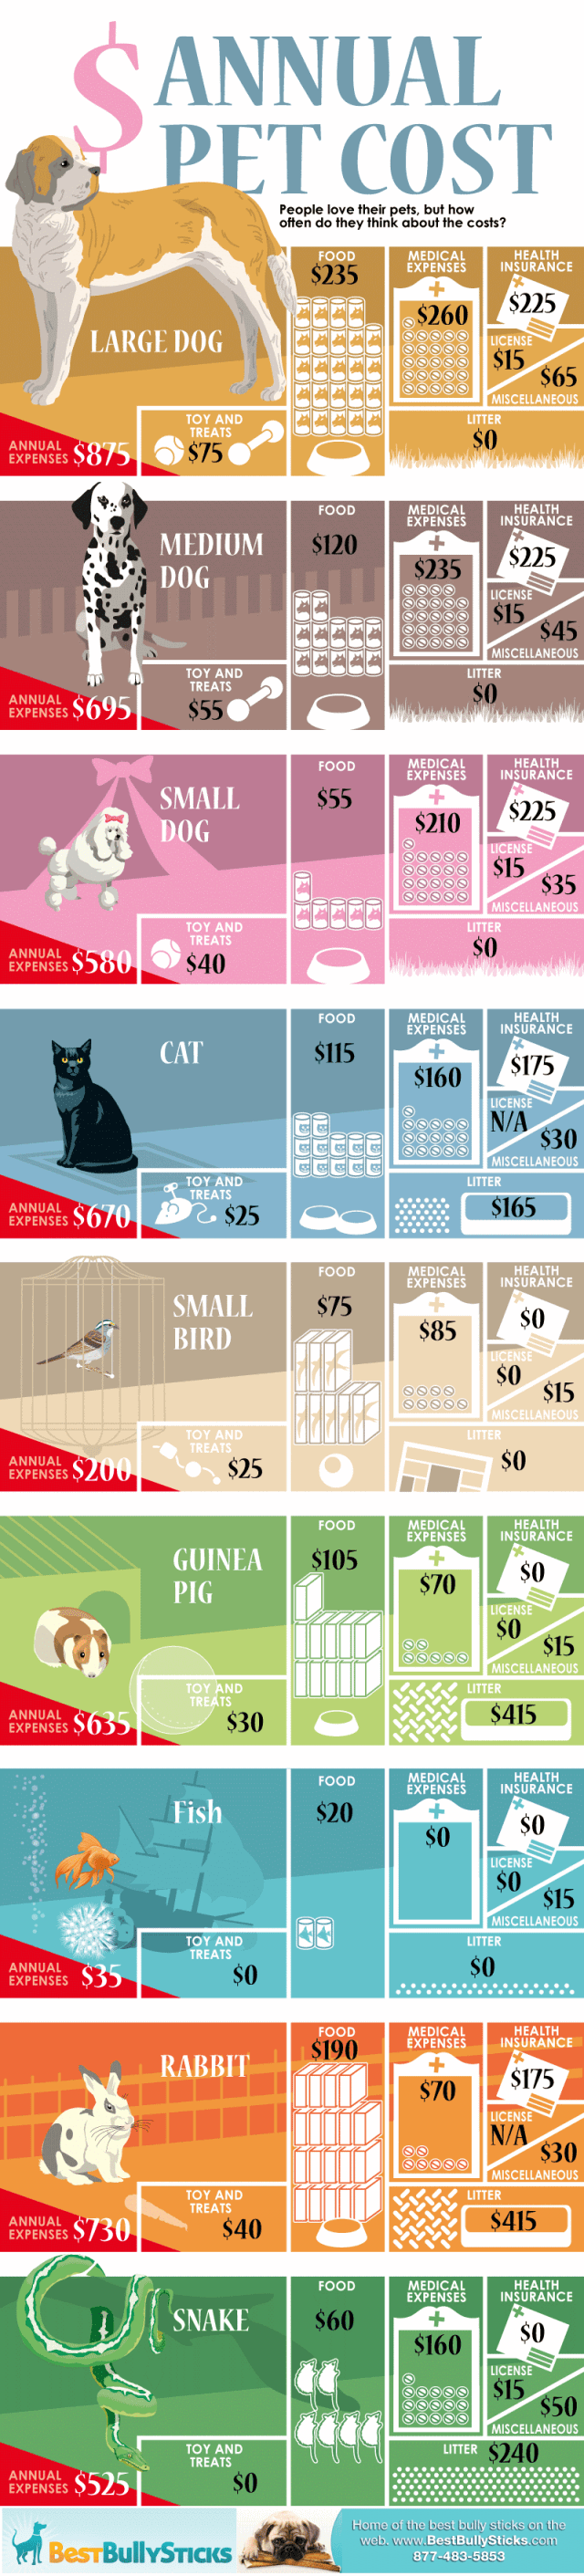 Annual Cost of Pets